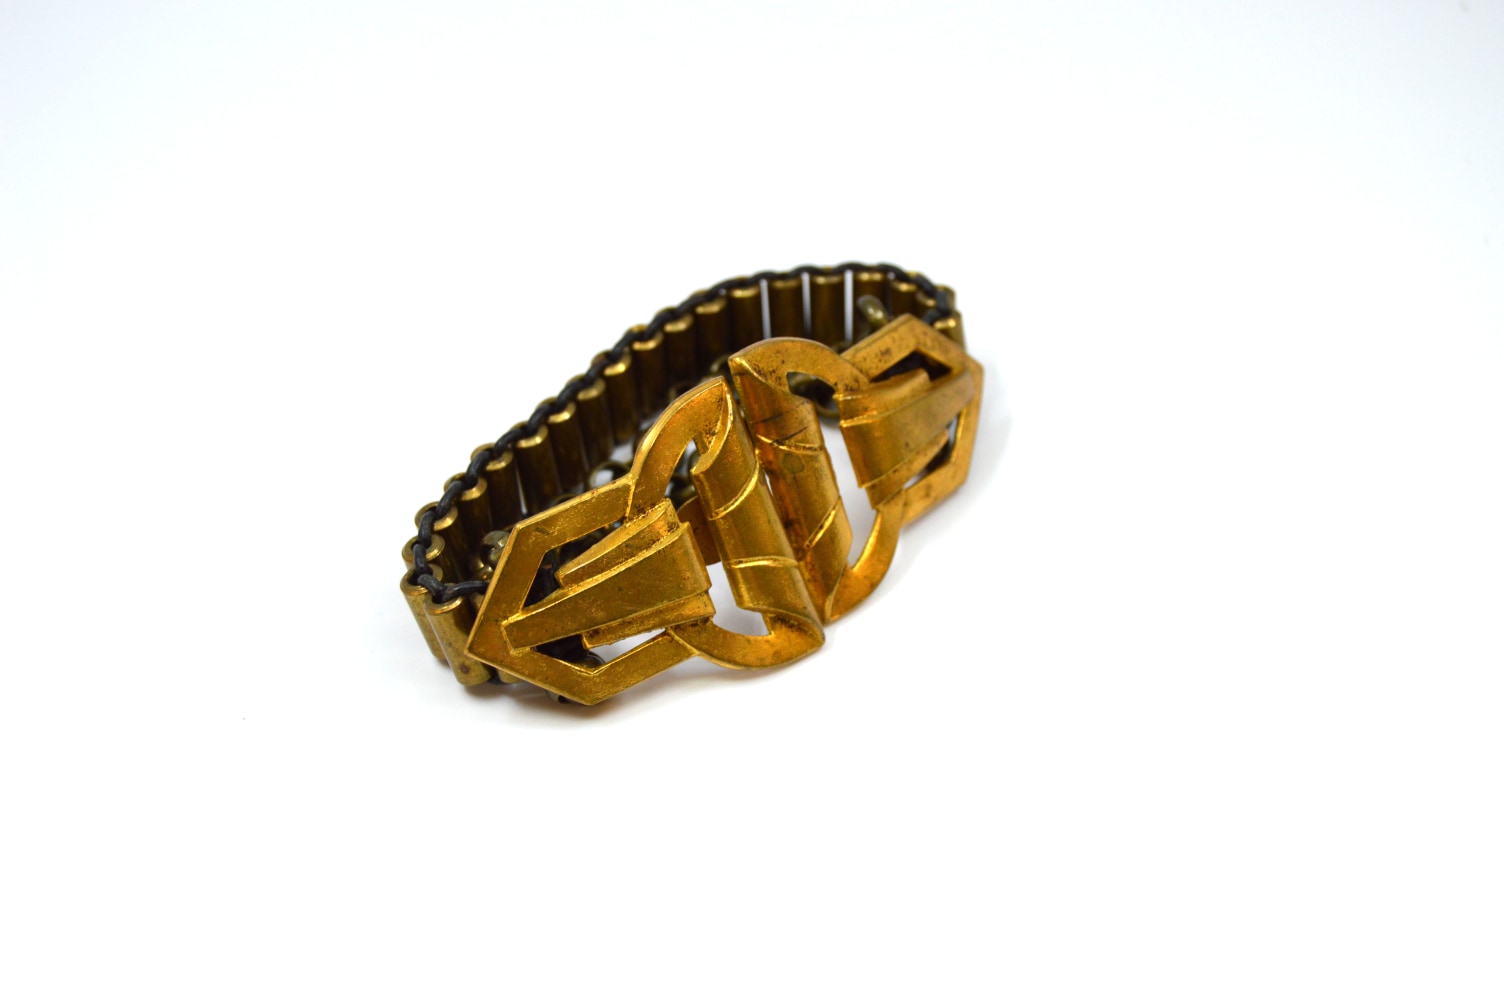 Amanda Kaiserman, Pandora Bracelet  one size  Antique Belt Buckle With Brass Chain And Tube, Beads, Leather Cord